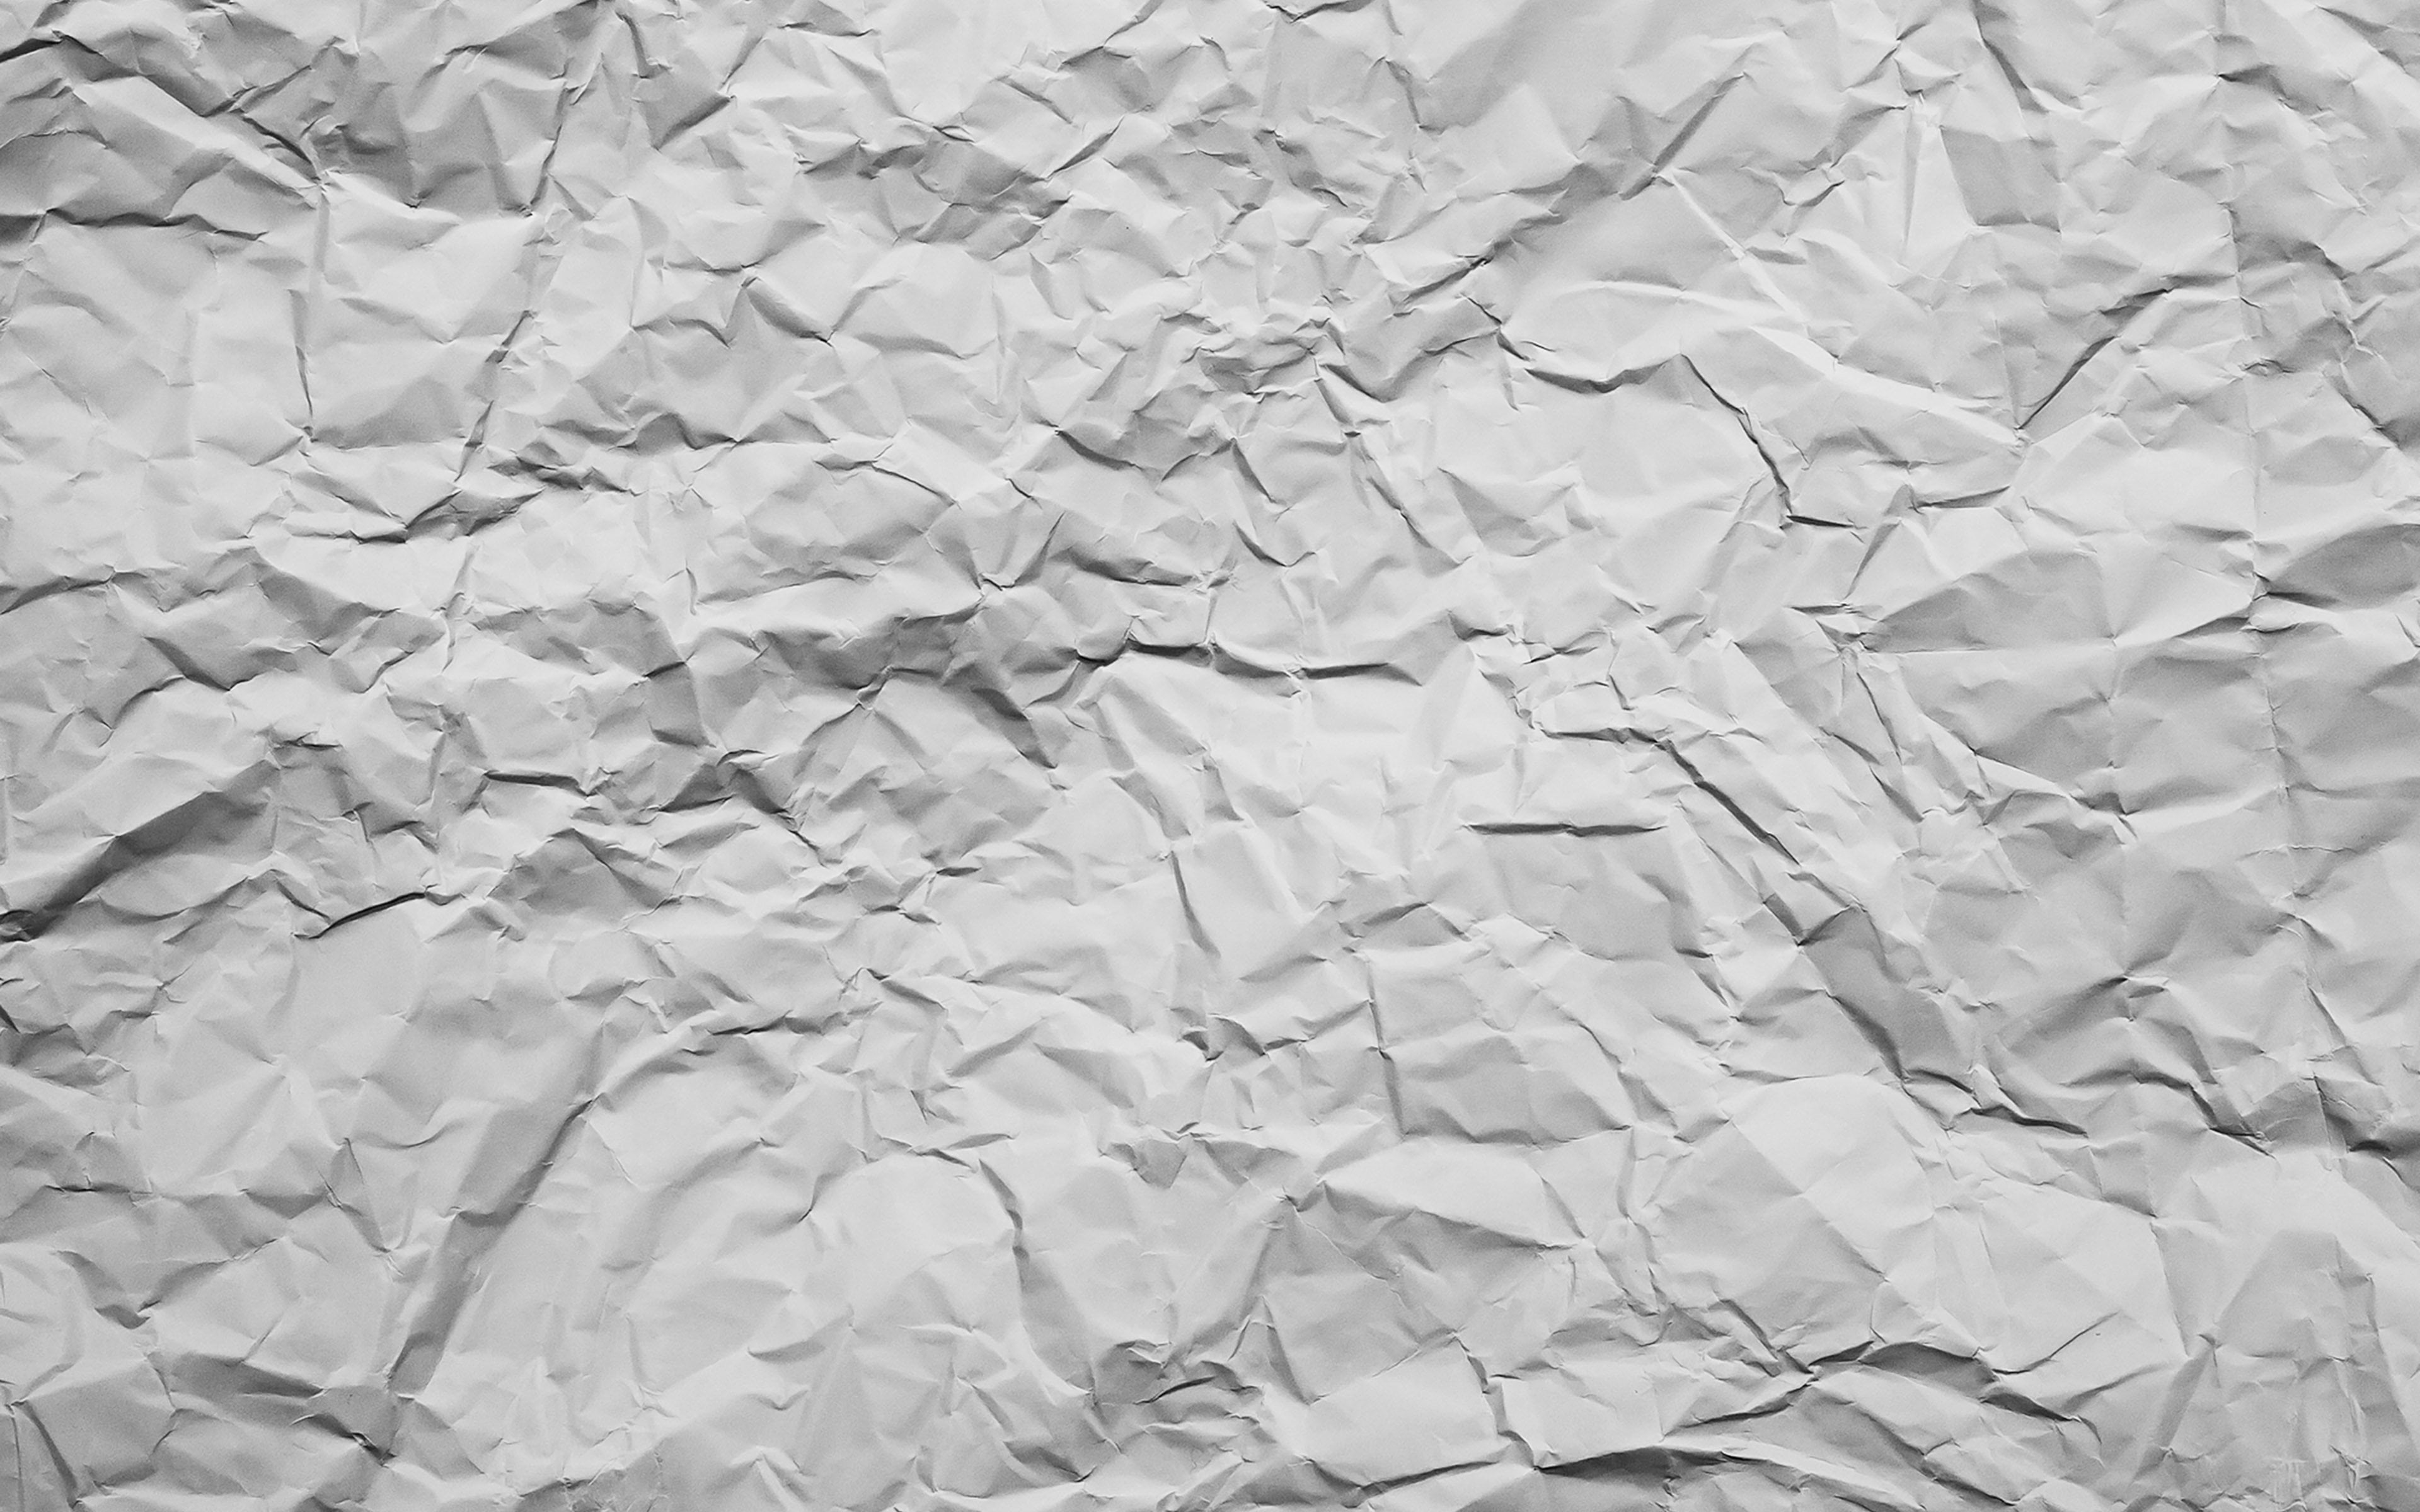 paper, creased, white, texture, crumpled, full frame, backgrounds